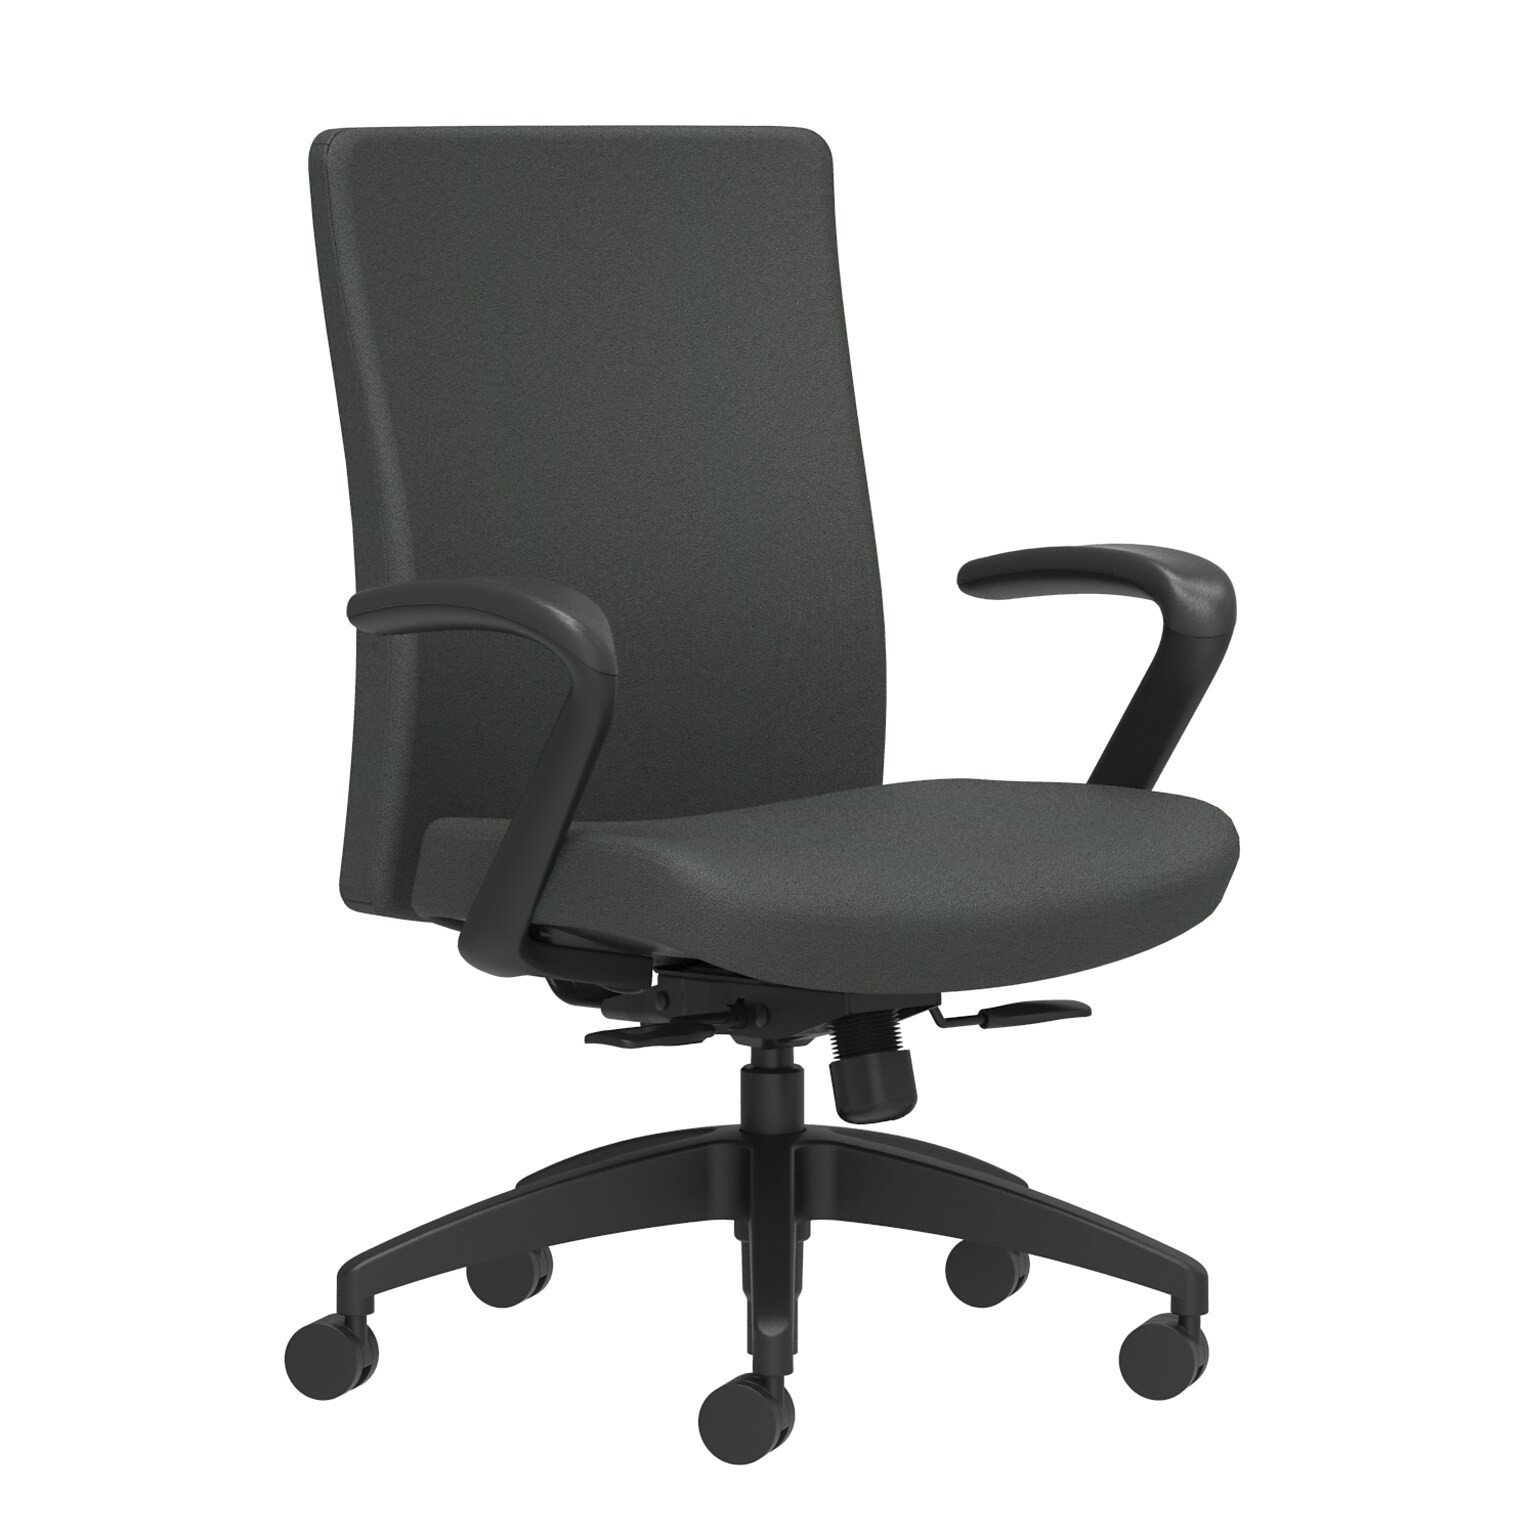 Union & Scale Workplace2.0™ Task Chair Upholstered, Fixed Arms, Iron Ore Fabric, Synchro Tilt (54155)